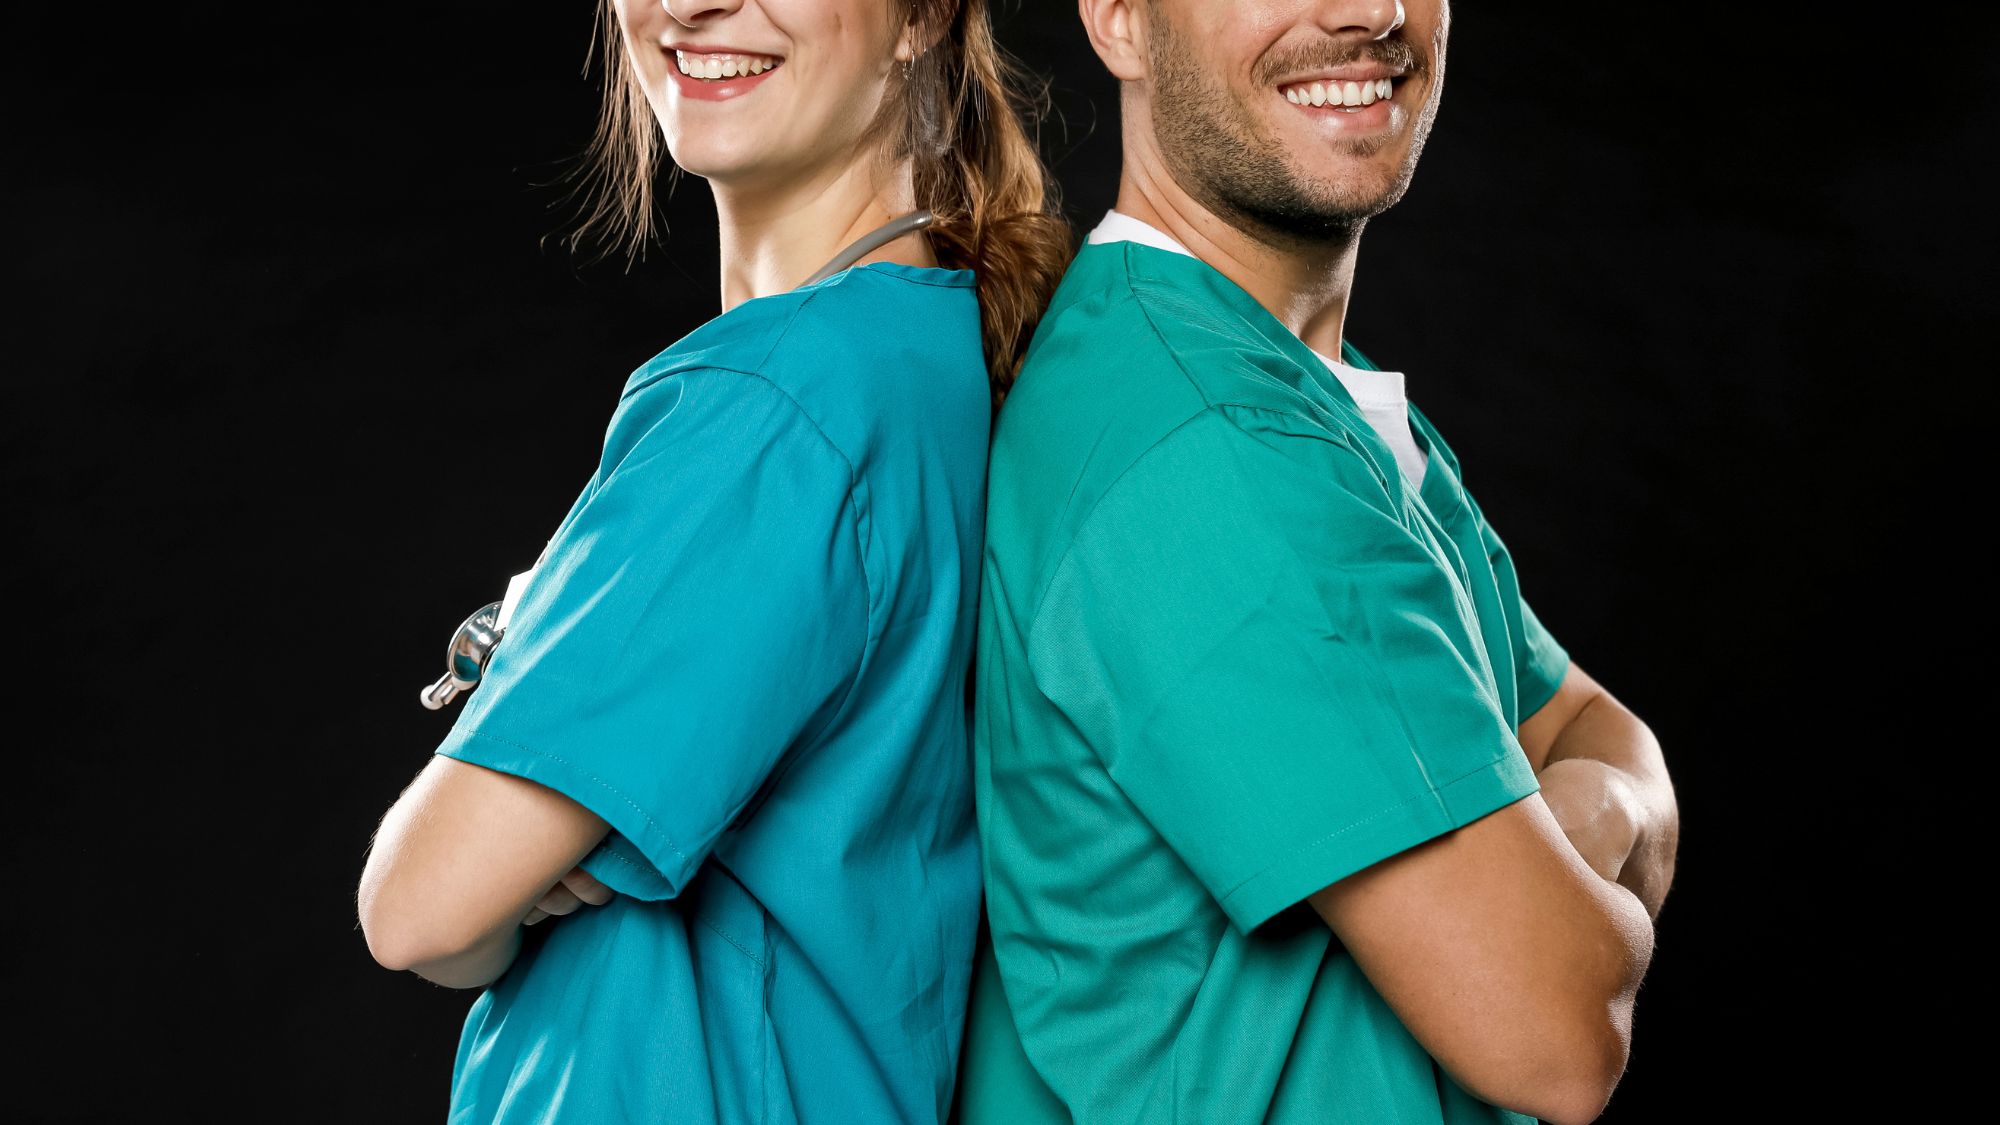 A man and woman in scrub suits standing together, wearing the standard scrubs uniform